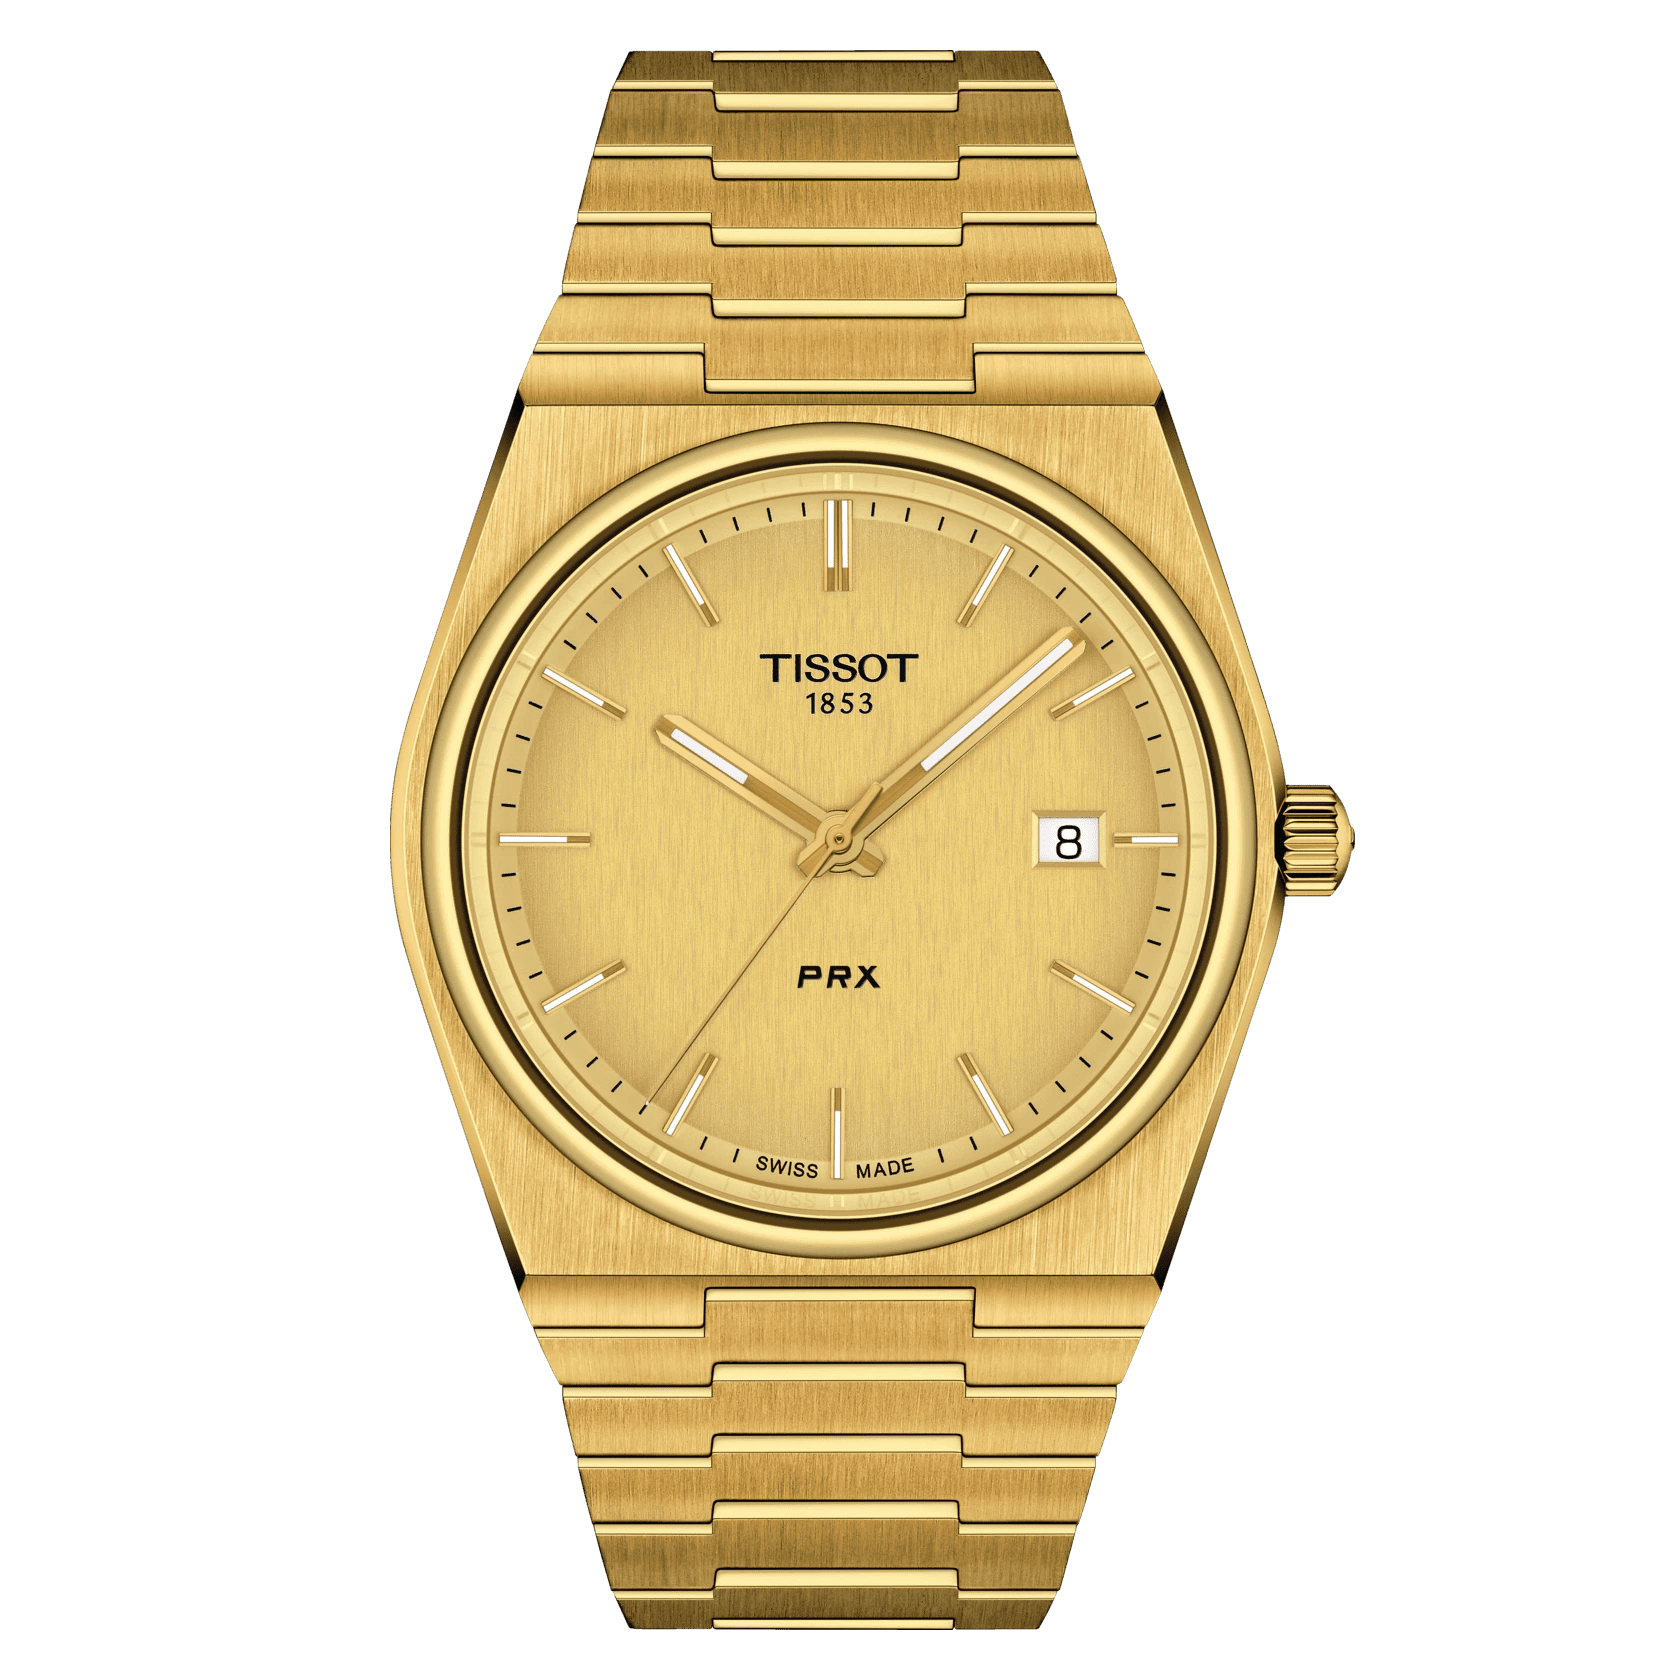 Tissot PRX Yellow-Gold PVD Stainless Steel Men's Watch T1374103302100